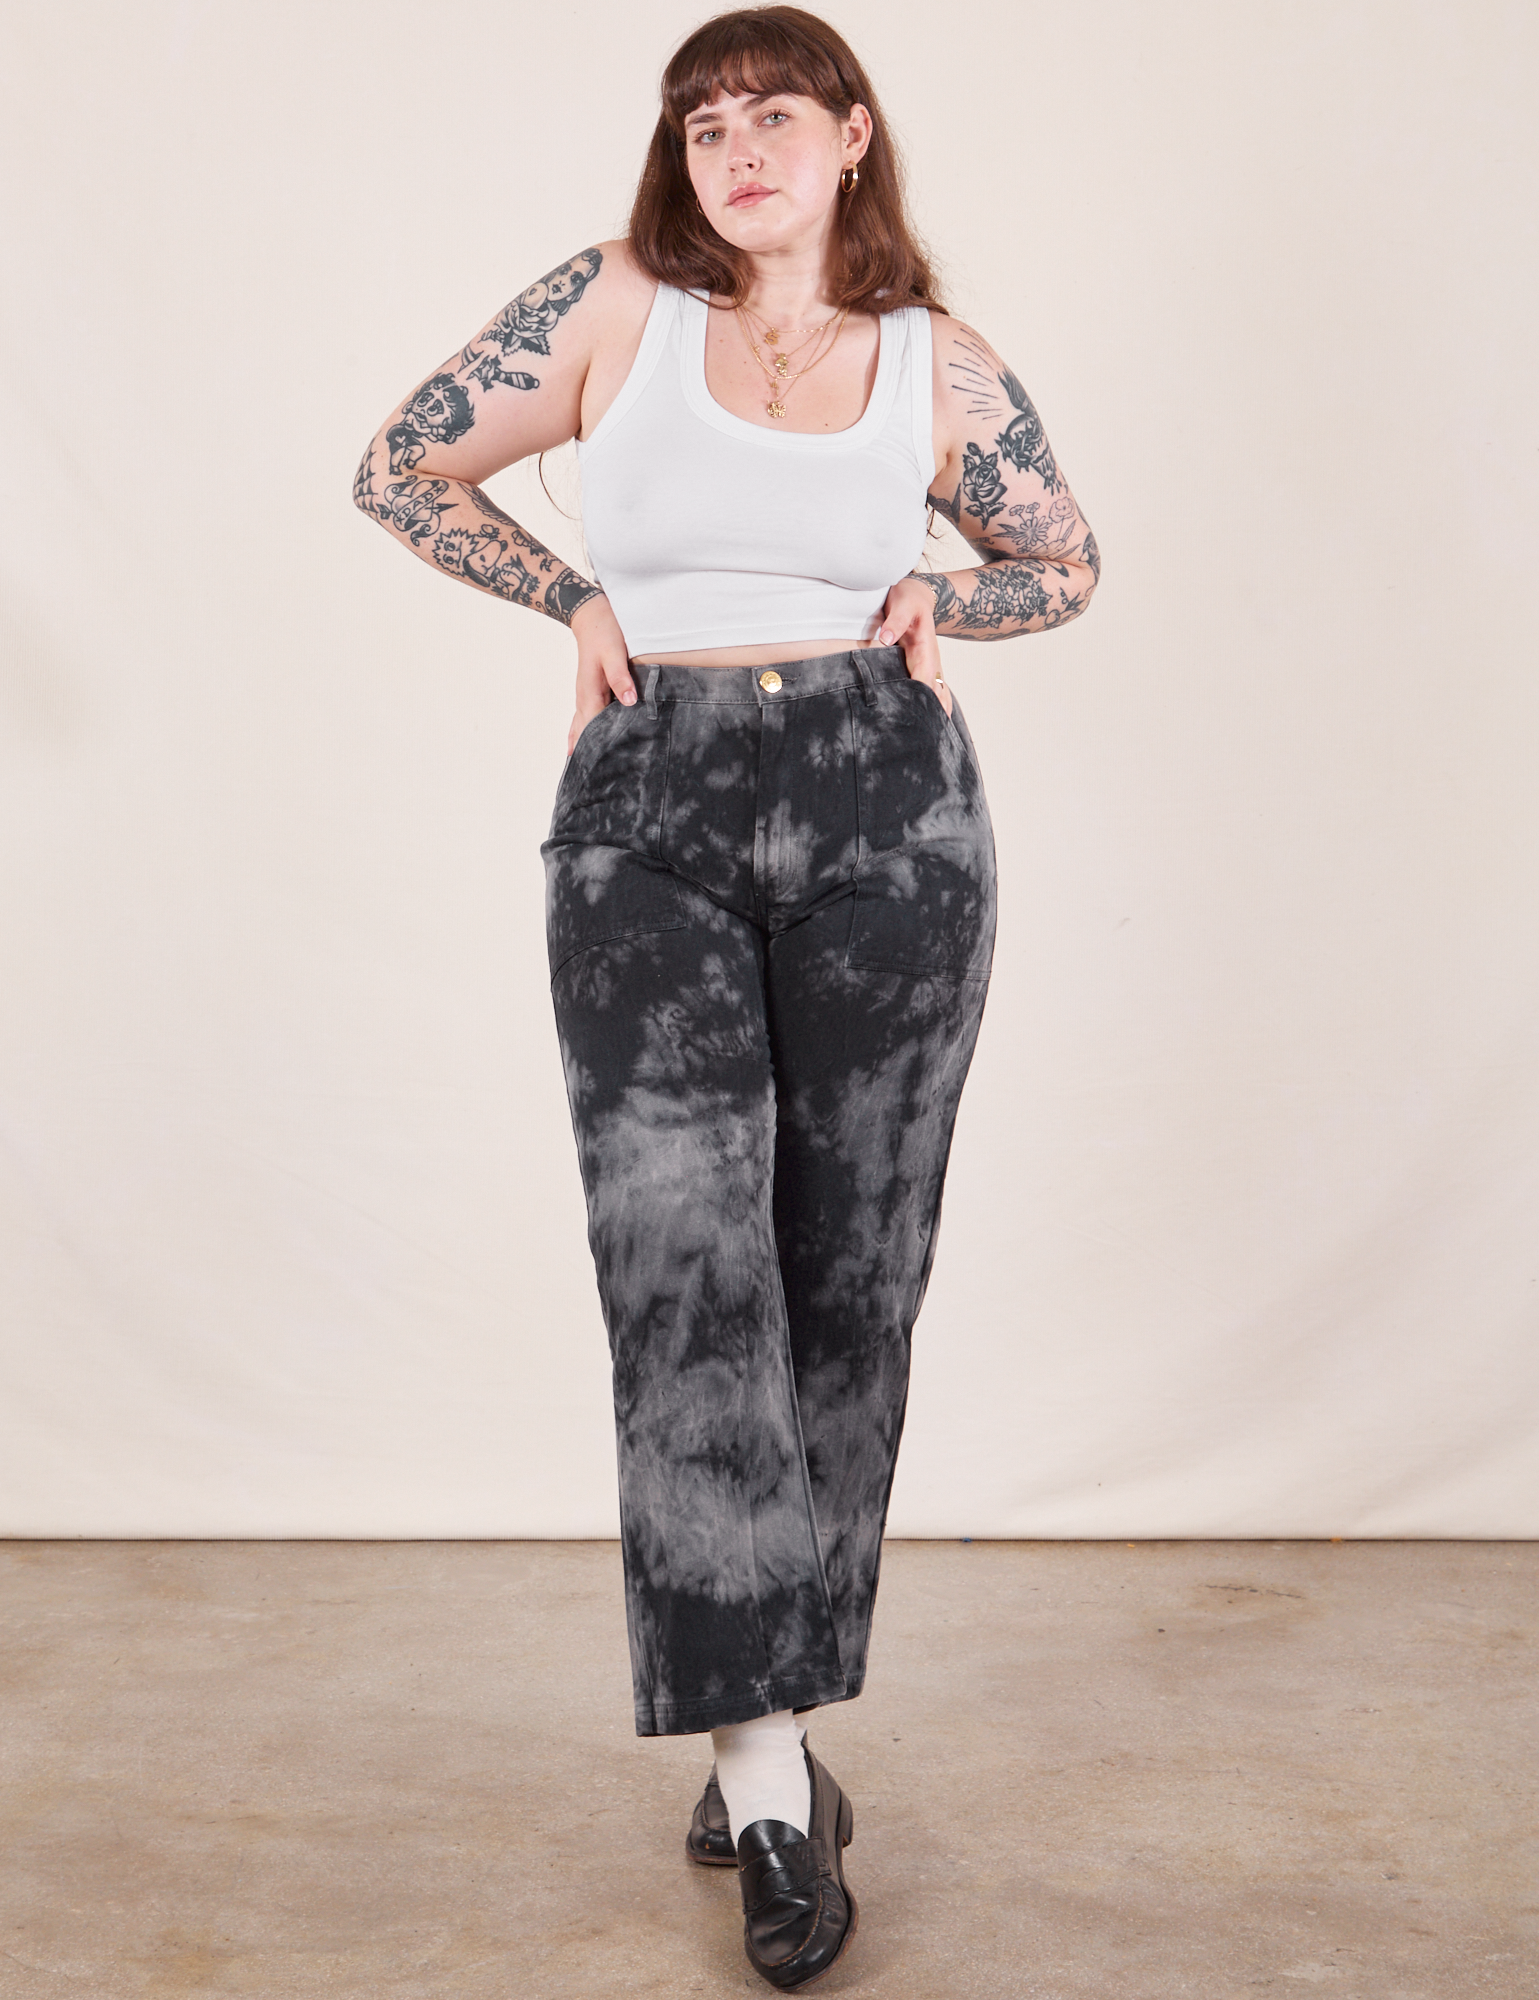 Sydney is wearing Black Magic Waters Work Pants and vintage off-white Cropped Tank Top